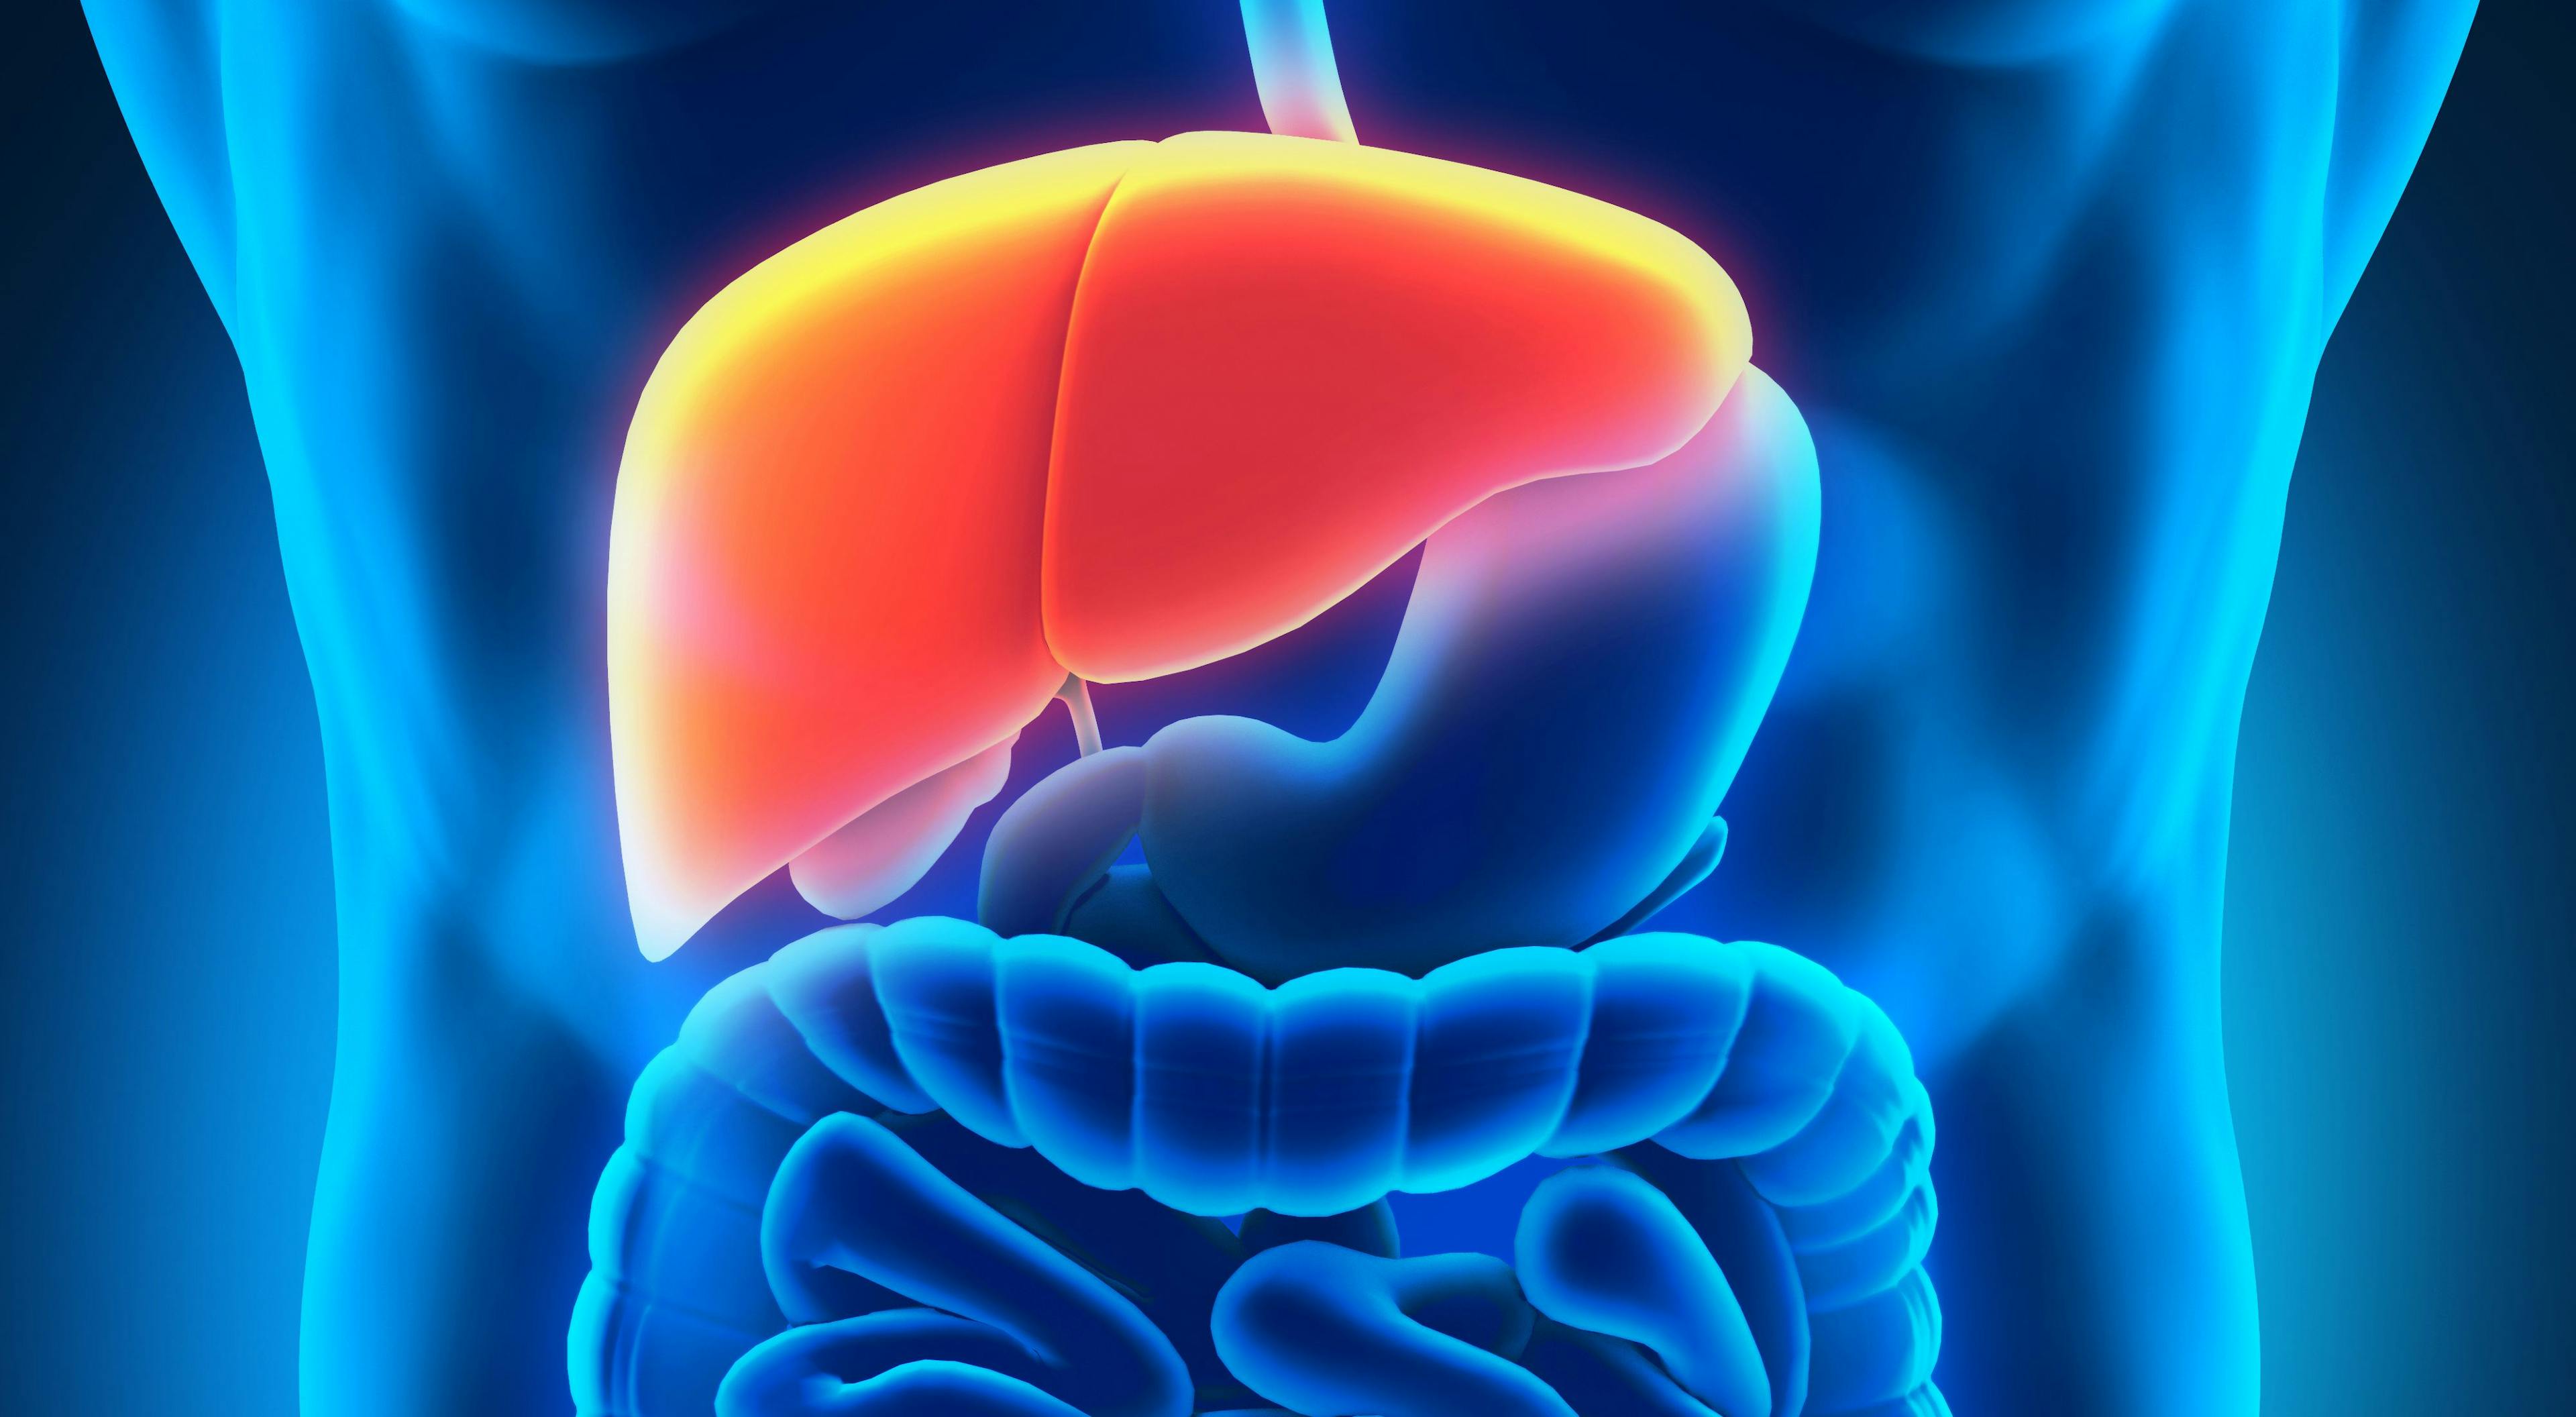 Numerous Quality-of-Life Disturbances Affect Patients with Cholangiocarcinoma, Survey Finds